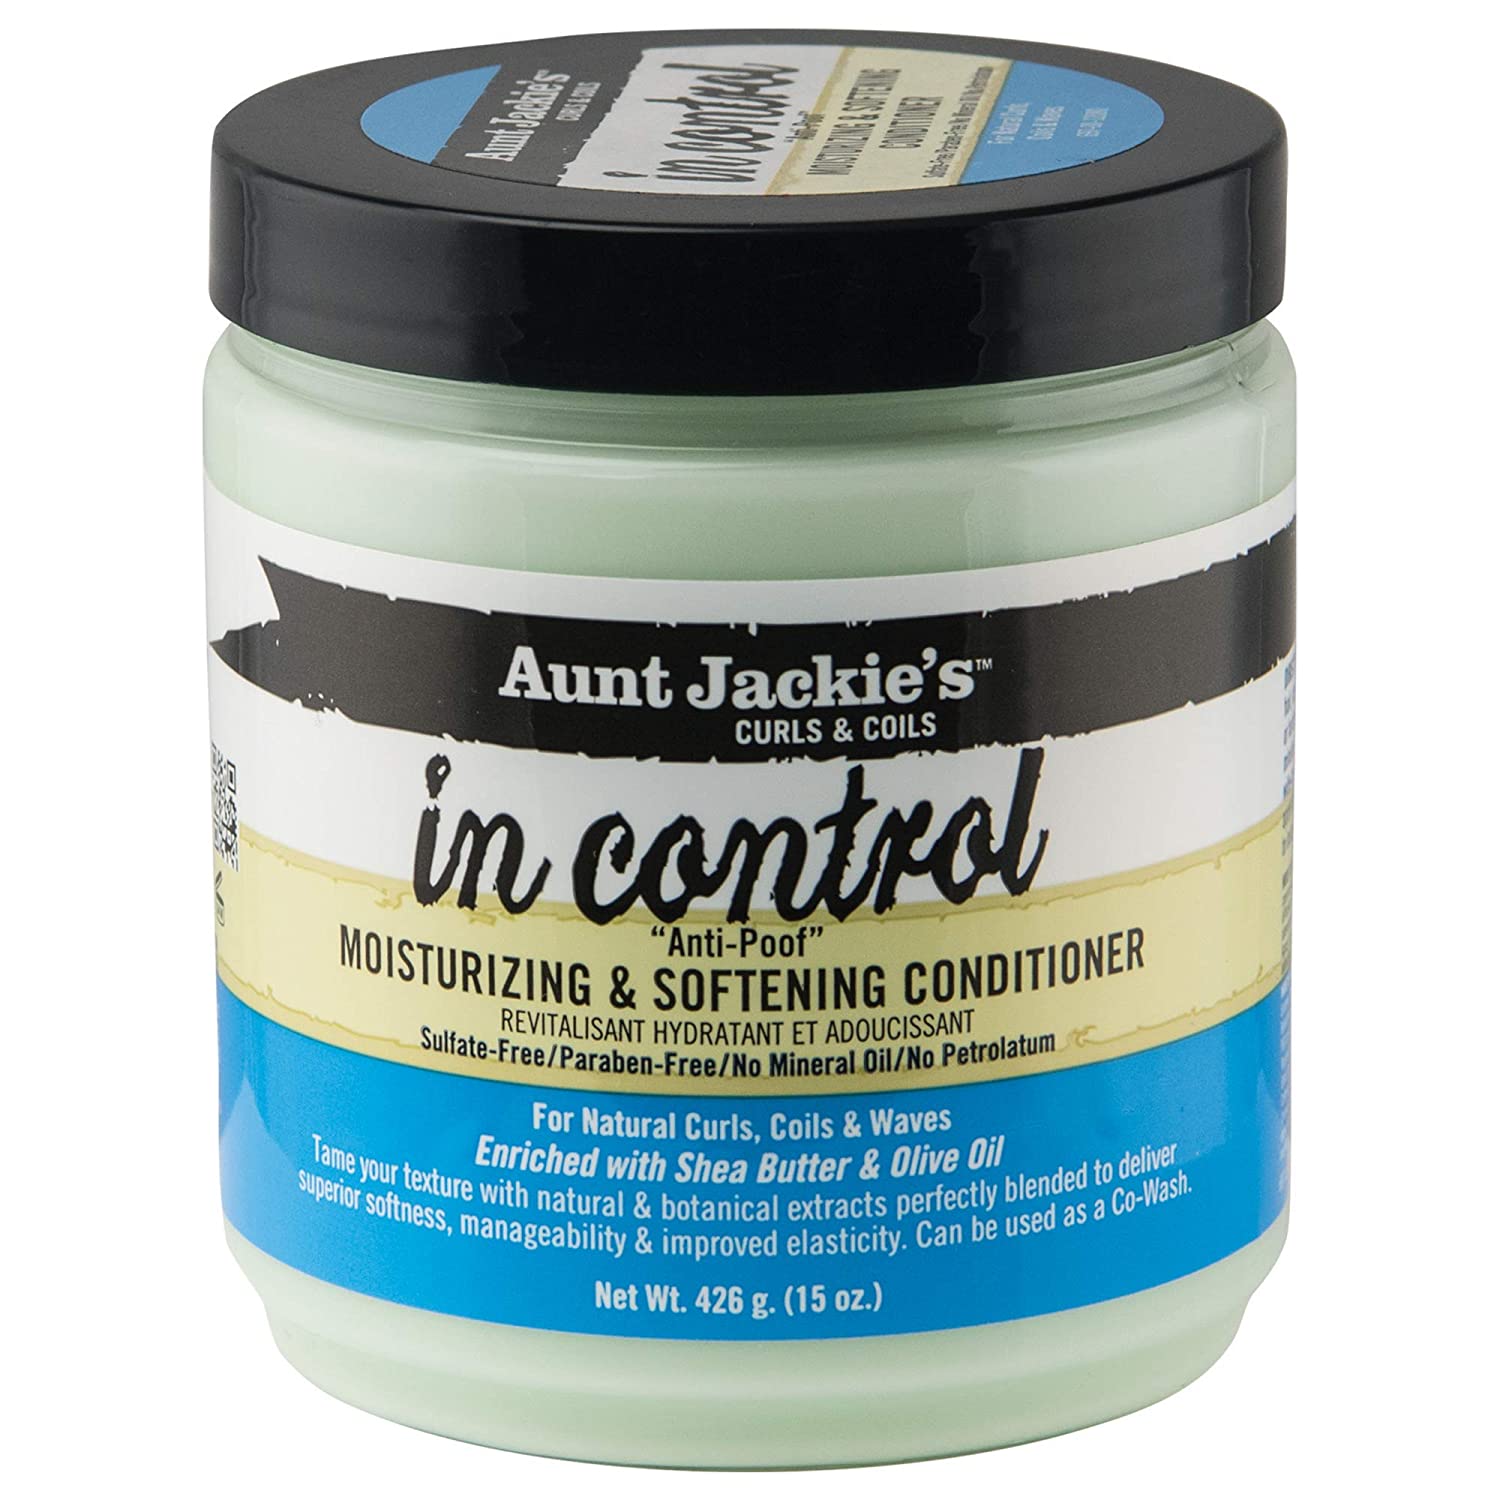 Aunt Jackie’s curls and coils IN CONTROL Anti-Poof Moisturizing & Softening Conditioner (15 oz.) 